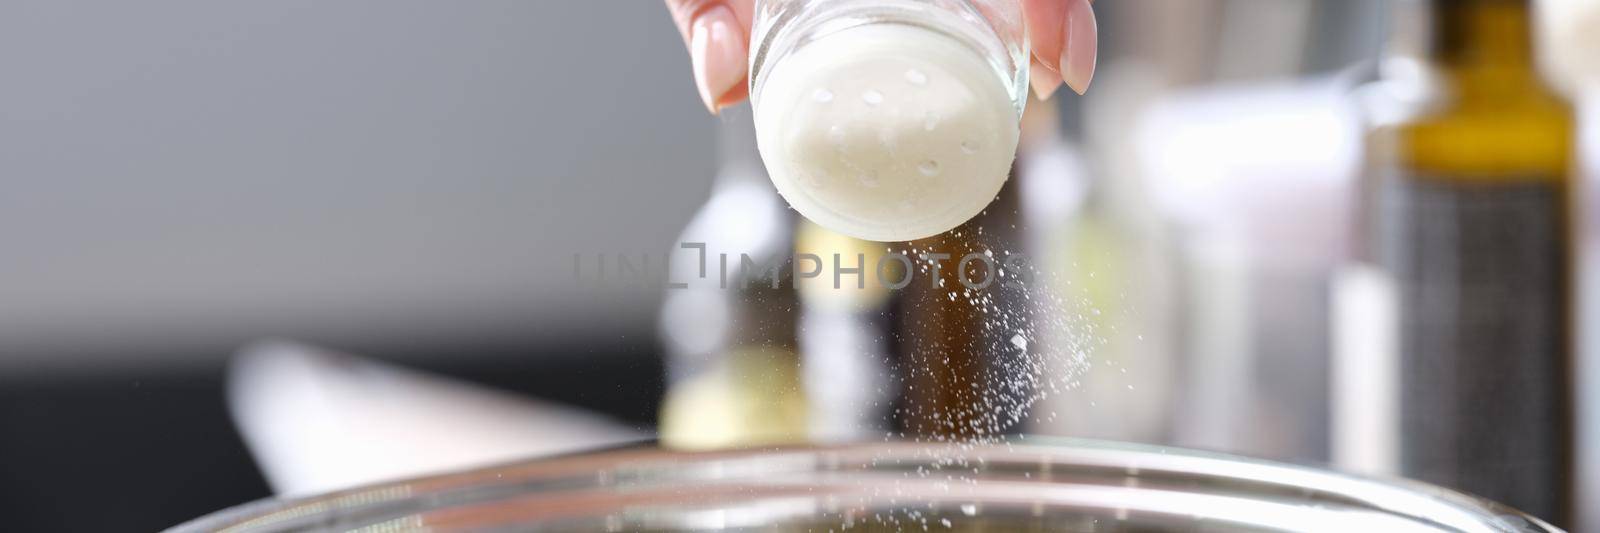 Chef pours salt into a saucepan with food, hands close-up by kuprevich